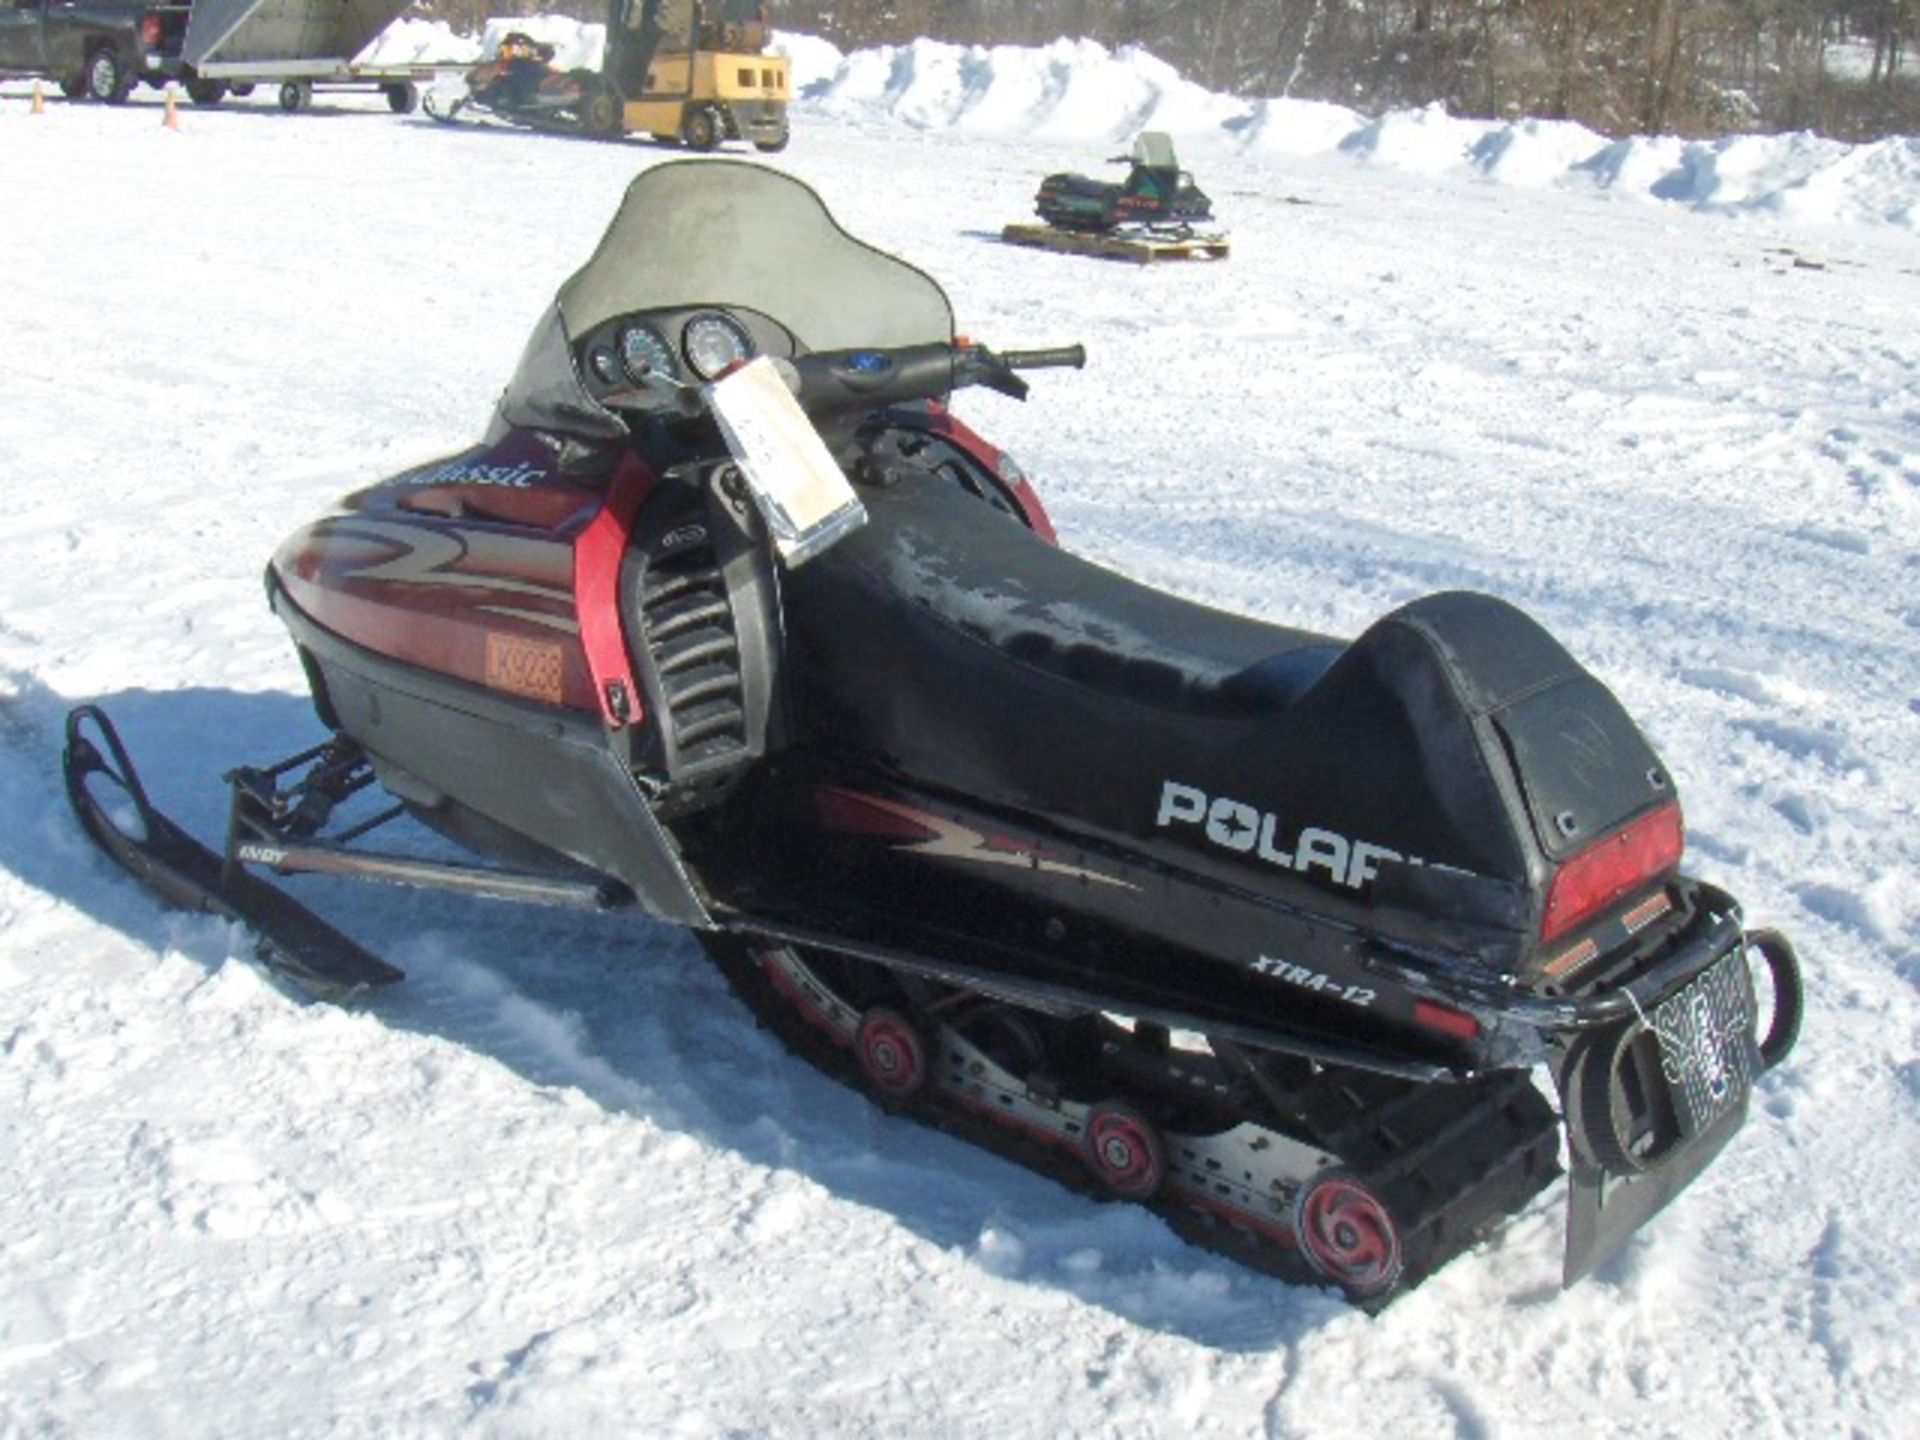 2000 POLARIS 500 CLASSIC  4XASD4B59YC006125 snowmobile, owner started at time of auction check in, - Image 4 of 4